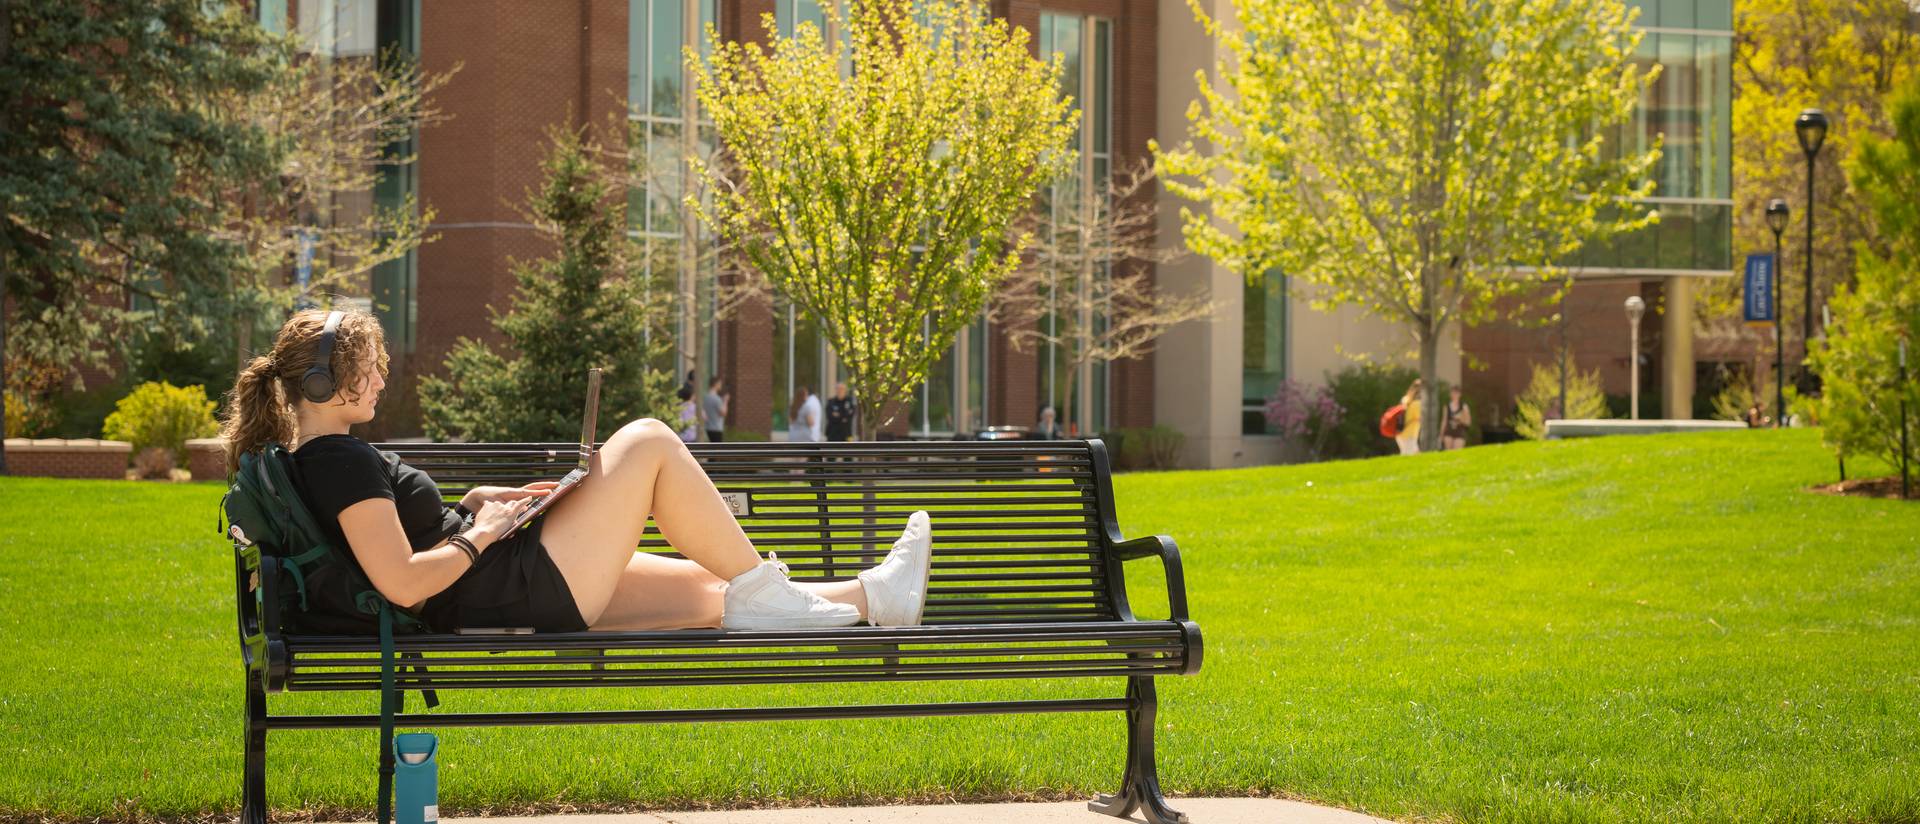 girl sitting on bench studying